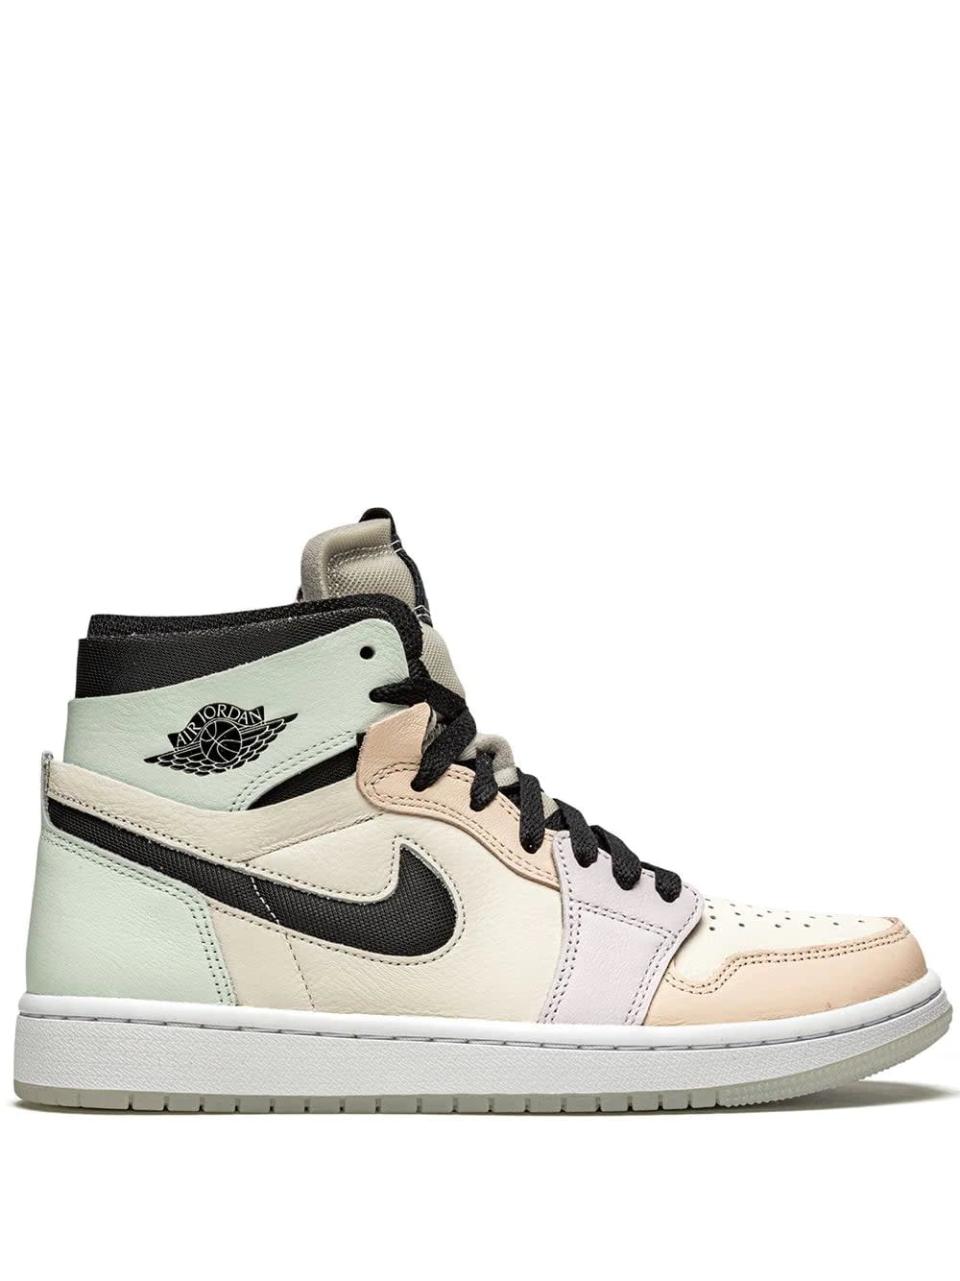 <p>Allow the soft, fresh tones of these <span>Jordan Air Jordan 1 Zoom Air CMFT Sneakers</span> ($263) to act as neutrals against a tailored suit or coordinate set. </p>